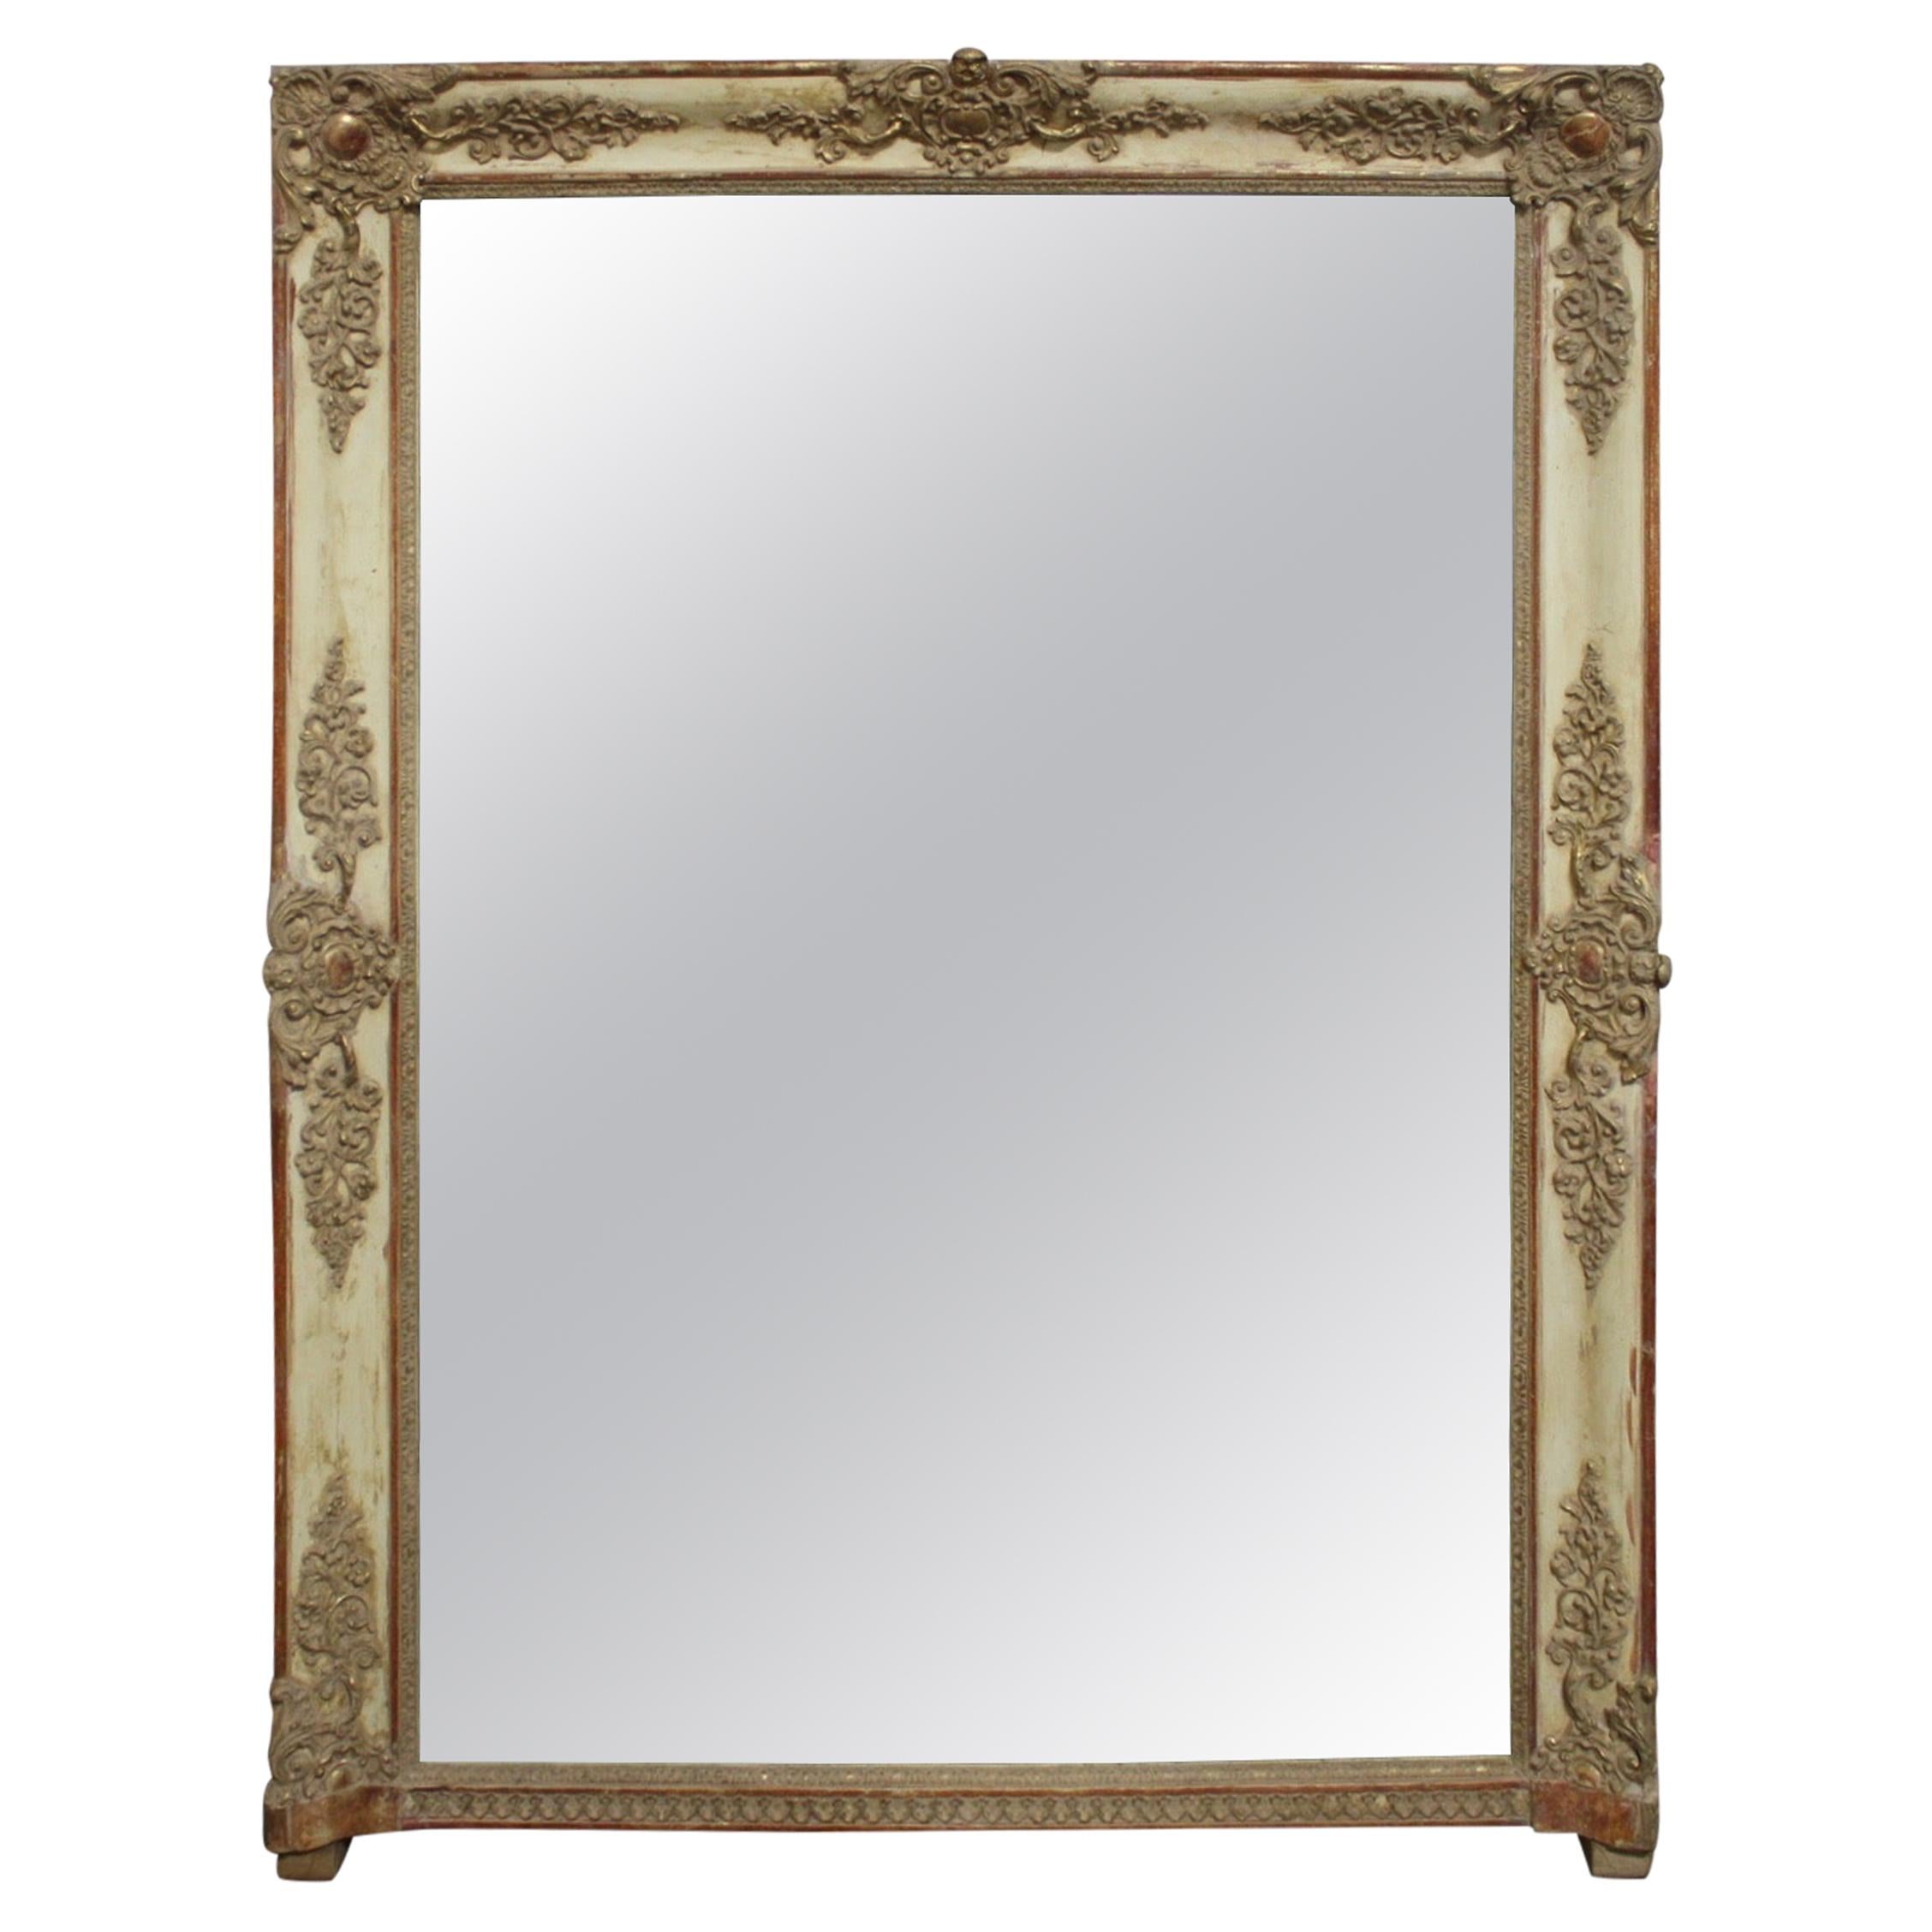 Early 19th Century French Mirror For Sale